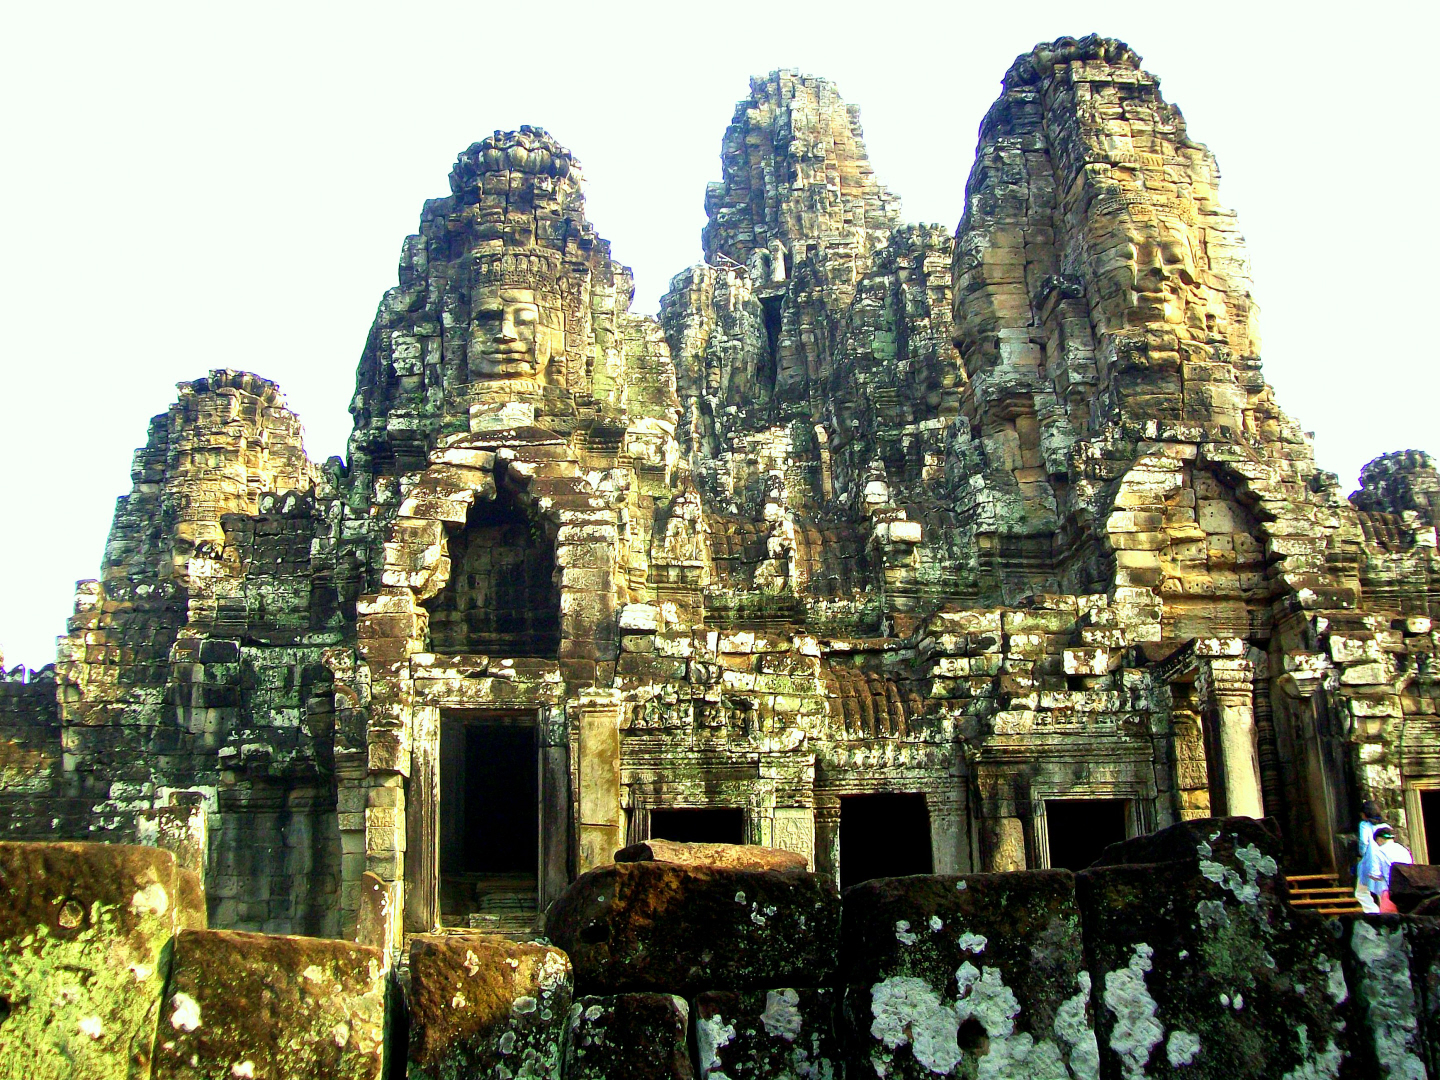 Angkor Thom - Bayon Temple Complex (See faces on the top of the Towers - Cambodia